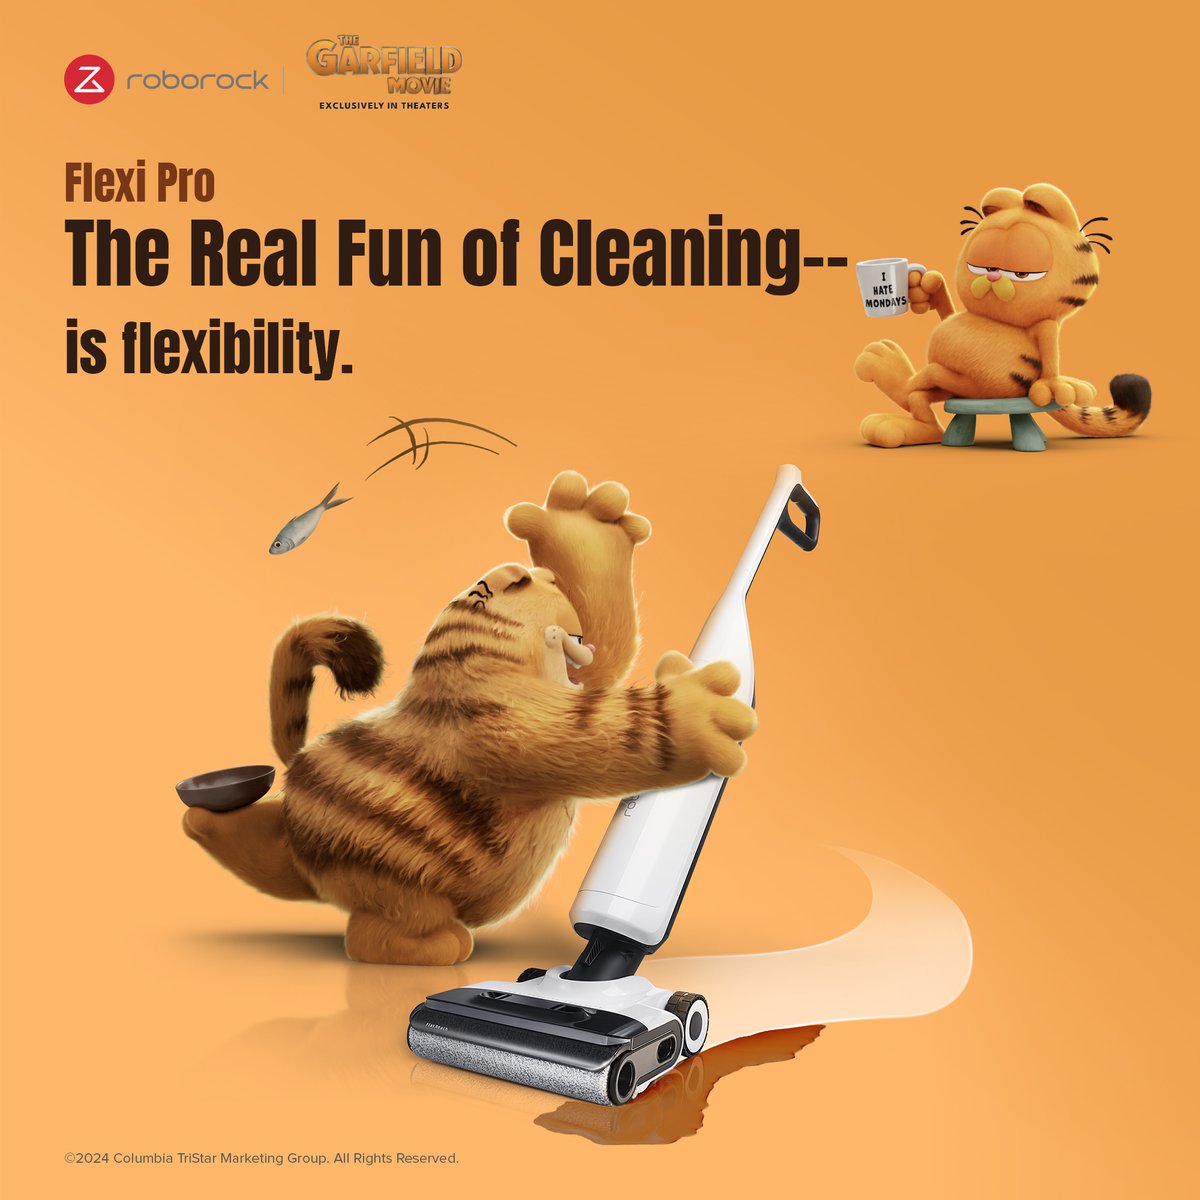 Join us as Vic and Baby Garfield team up with Roborock's Flexi Series to demonstrate the true joy of cleaning. With Flexi's flexibility, cleaning becomes an adventure, allowing you to enjoy every moment of it! And don't forget to watch The Garfield Movie, exclusively in theaters!